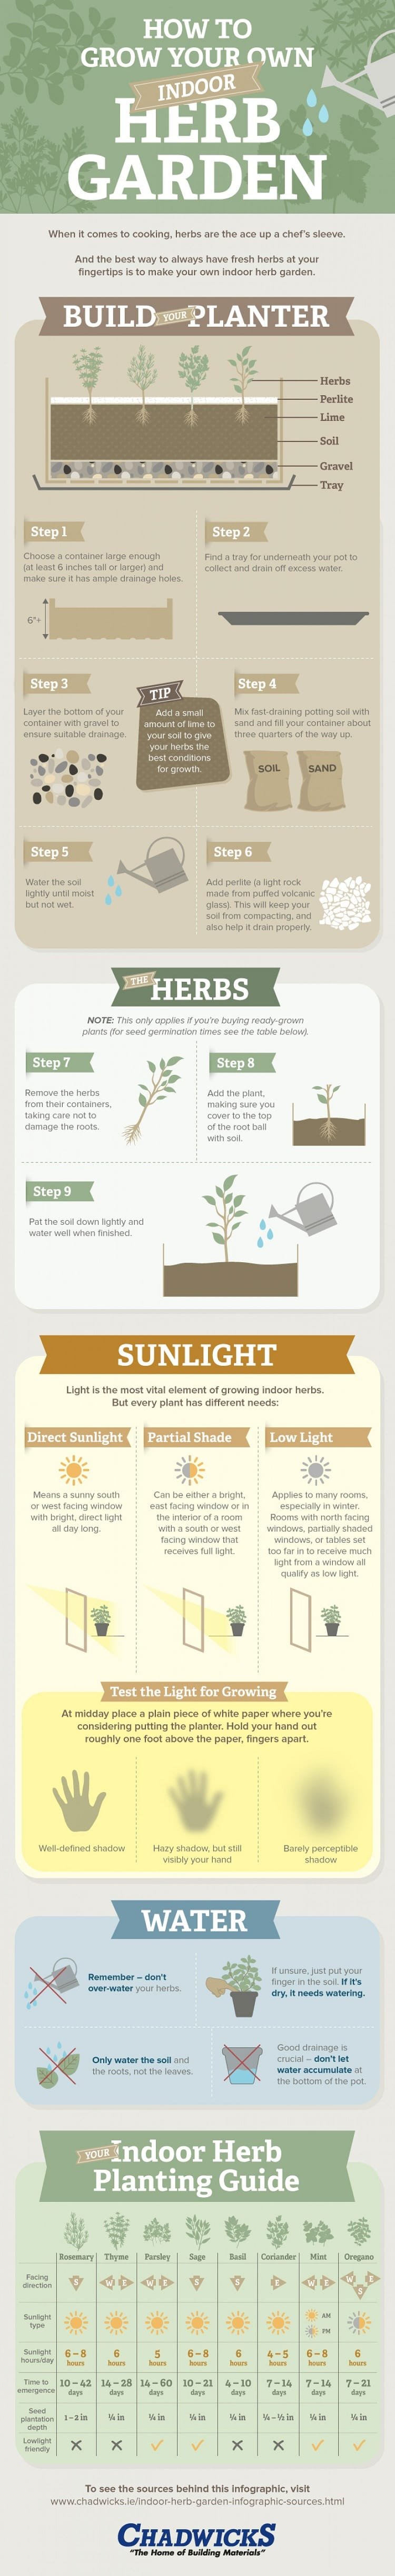 Want to grow an Indoor Herb Garden? Learn everything you need to know in these 7 INFOGRAPHICS that'll teach you everything about growing herbs indoors.